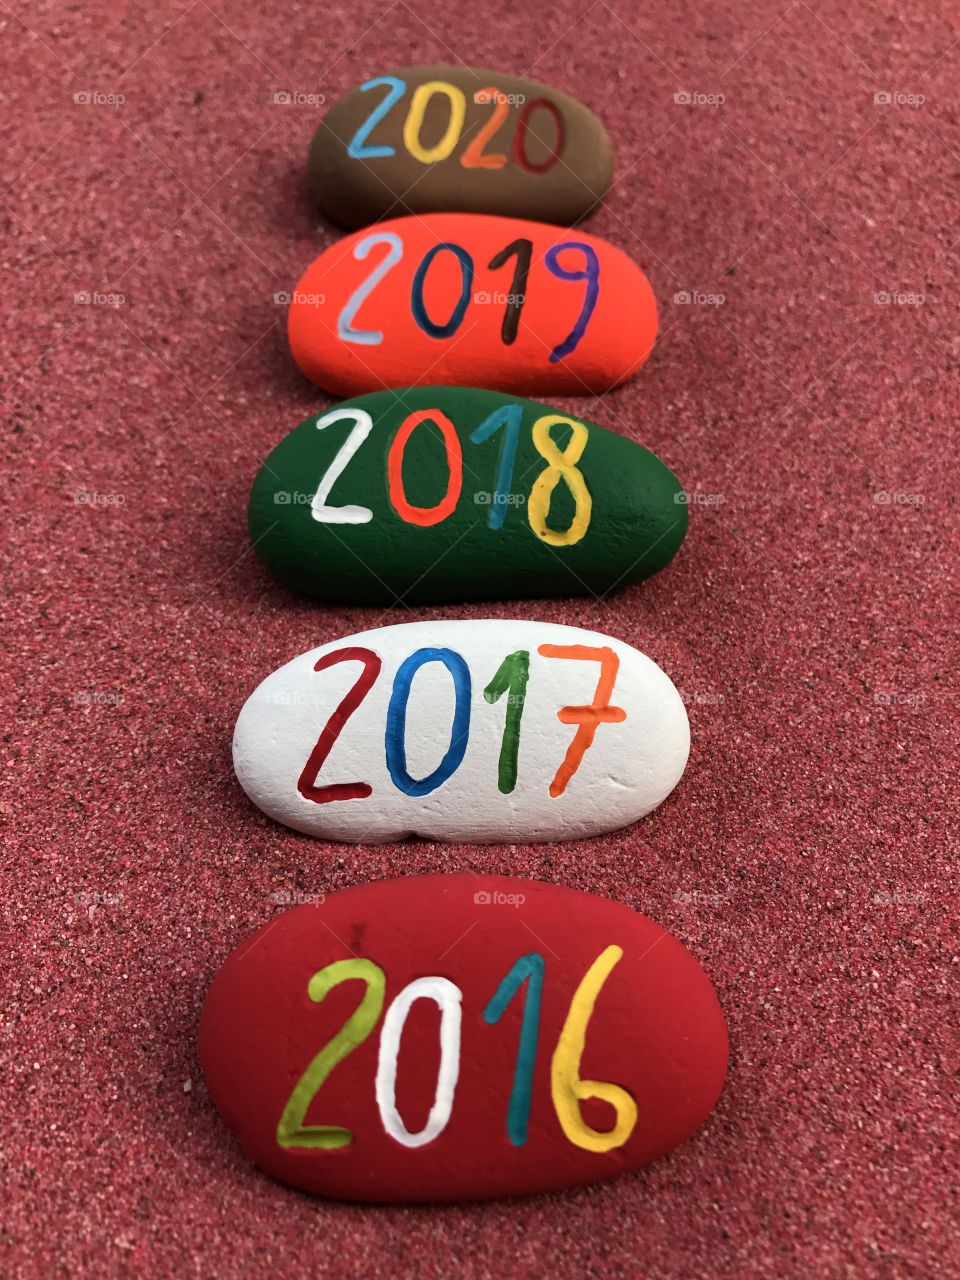 2016,2017,2018,2019,2020 on painted stones over red sand